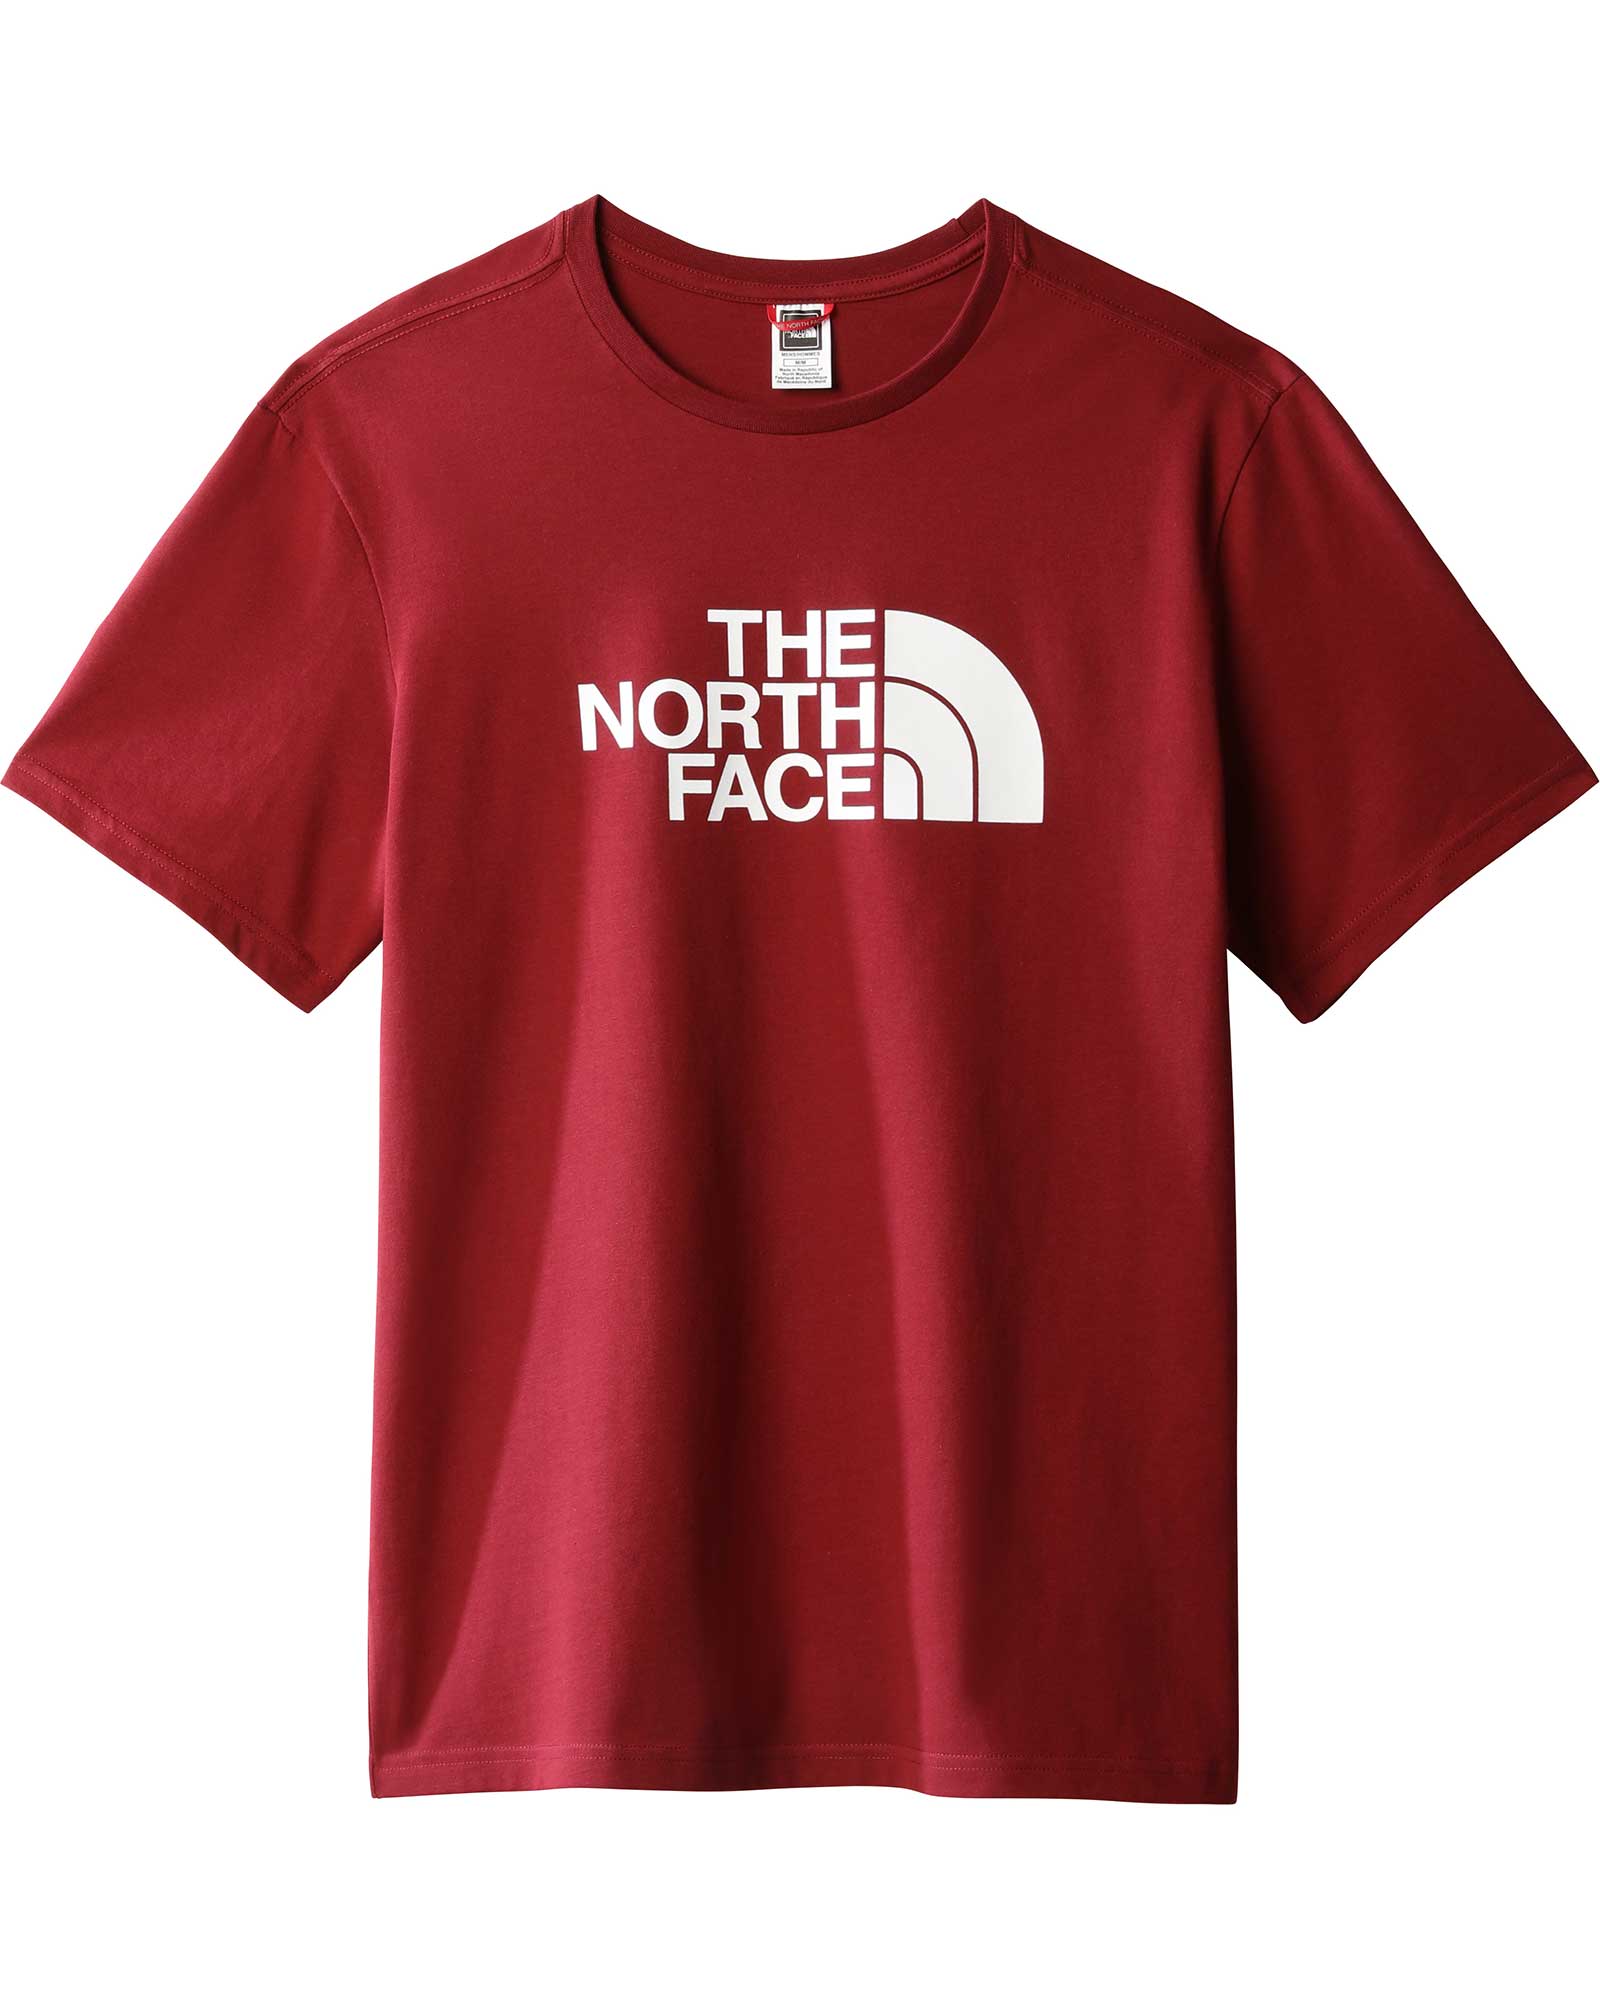 The North Face Easy Men’s T Shirt - Cordovan M